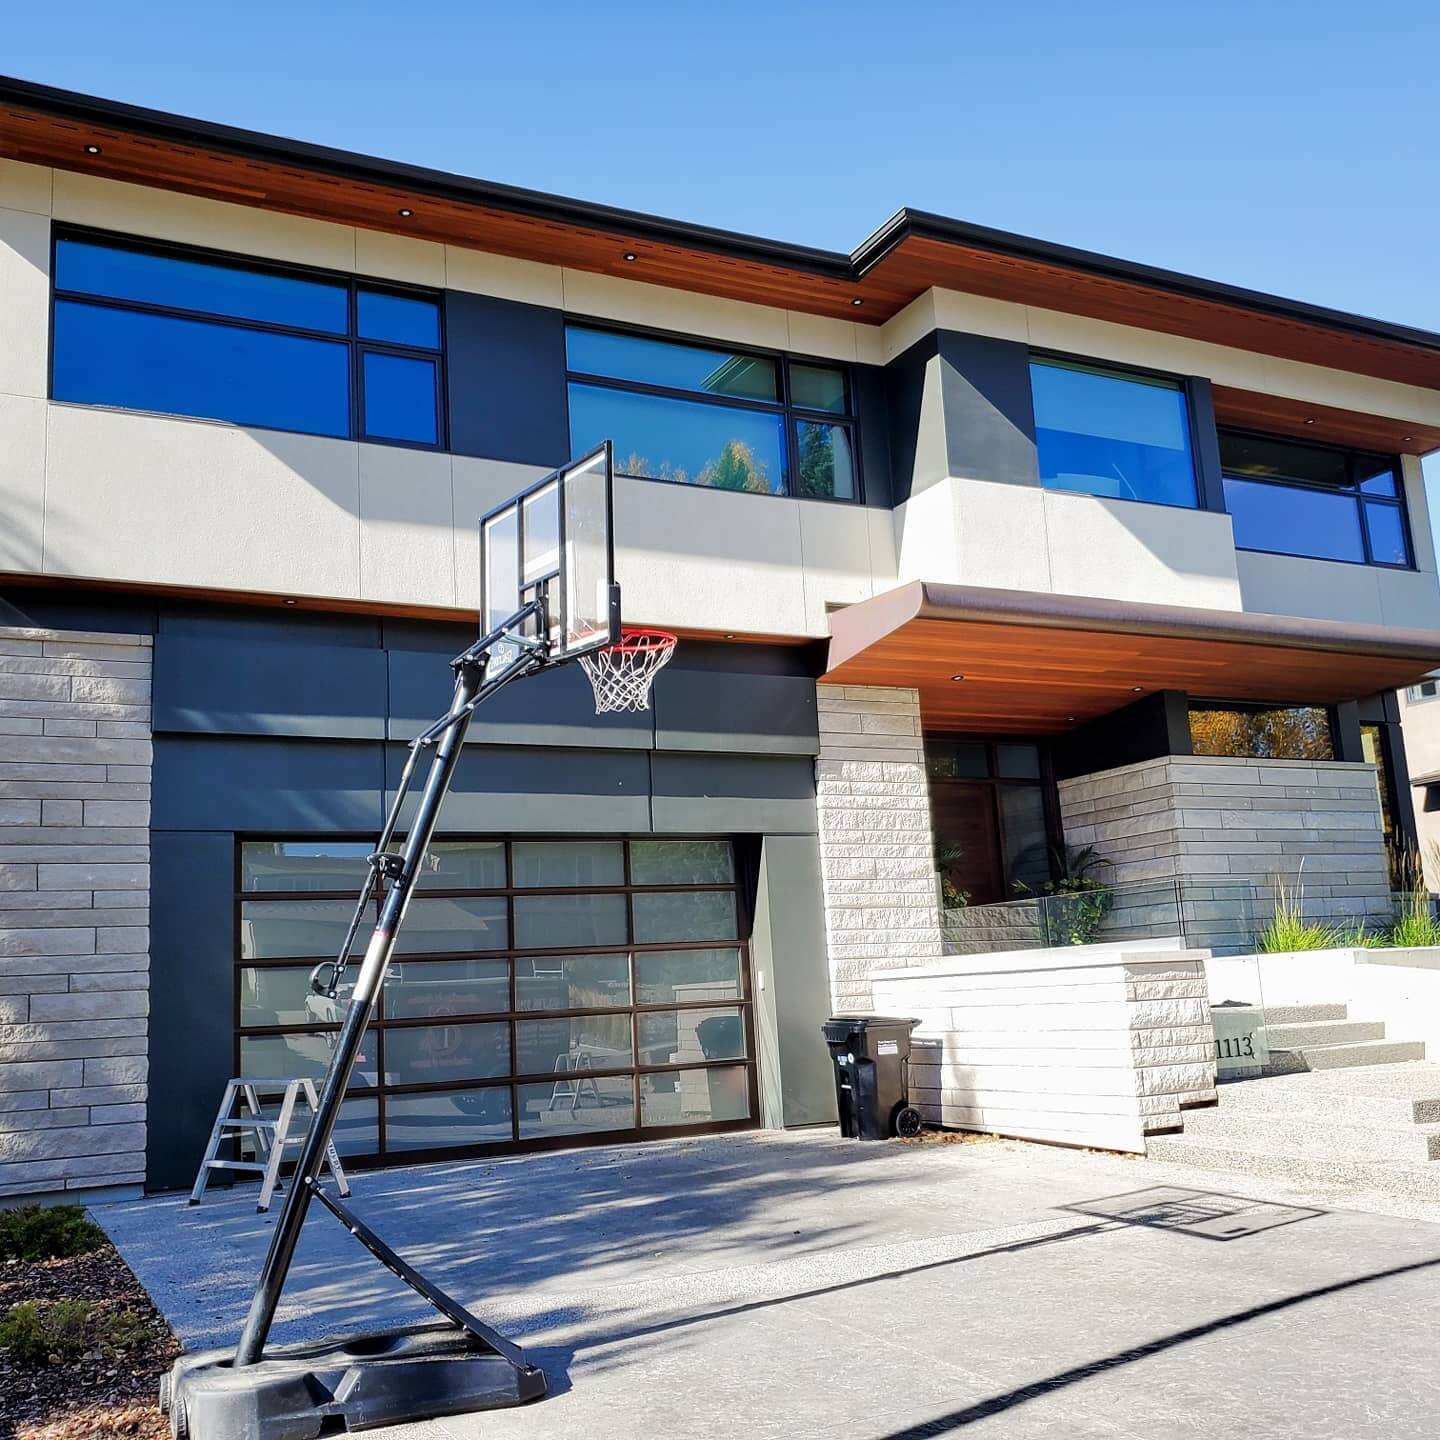 Clean Windows on Residential House with Basketball Net